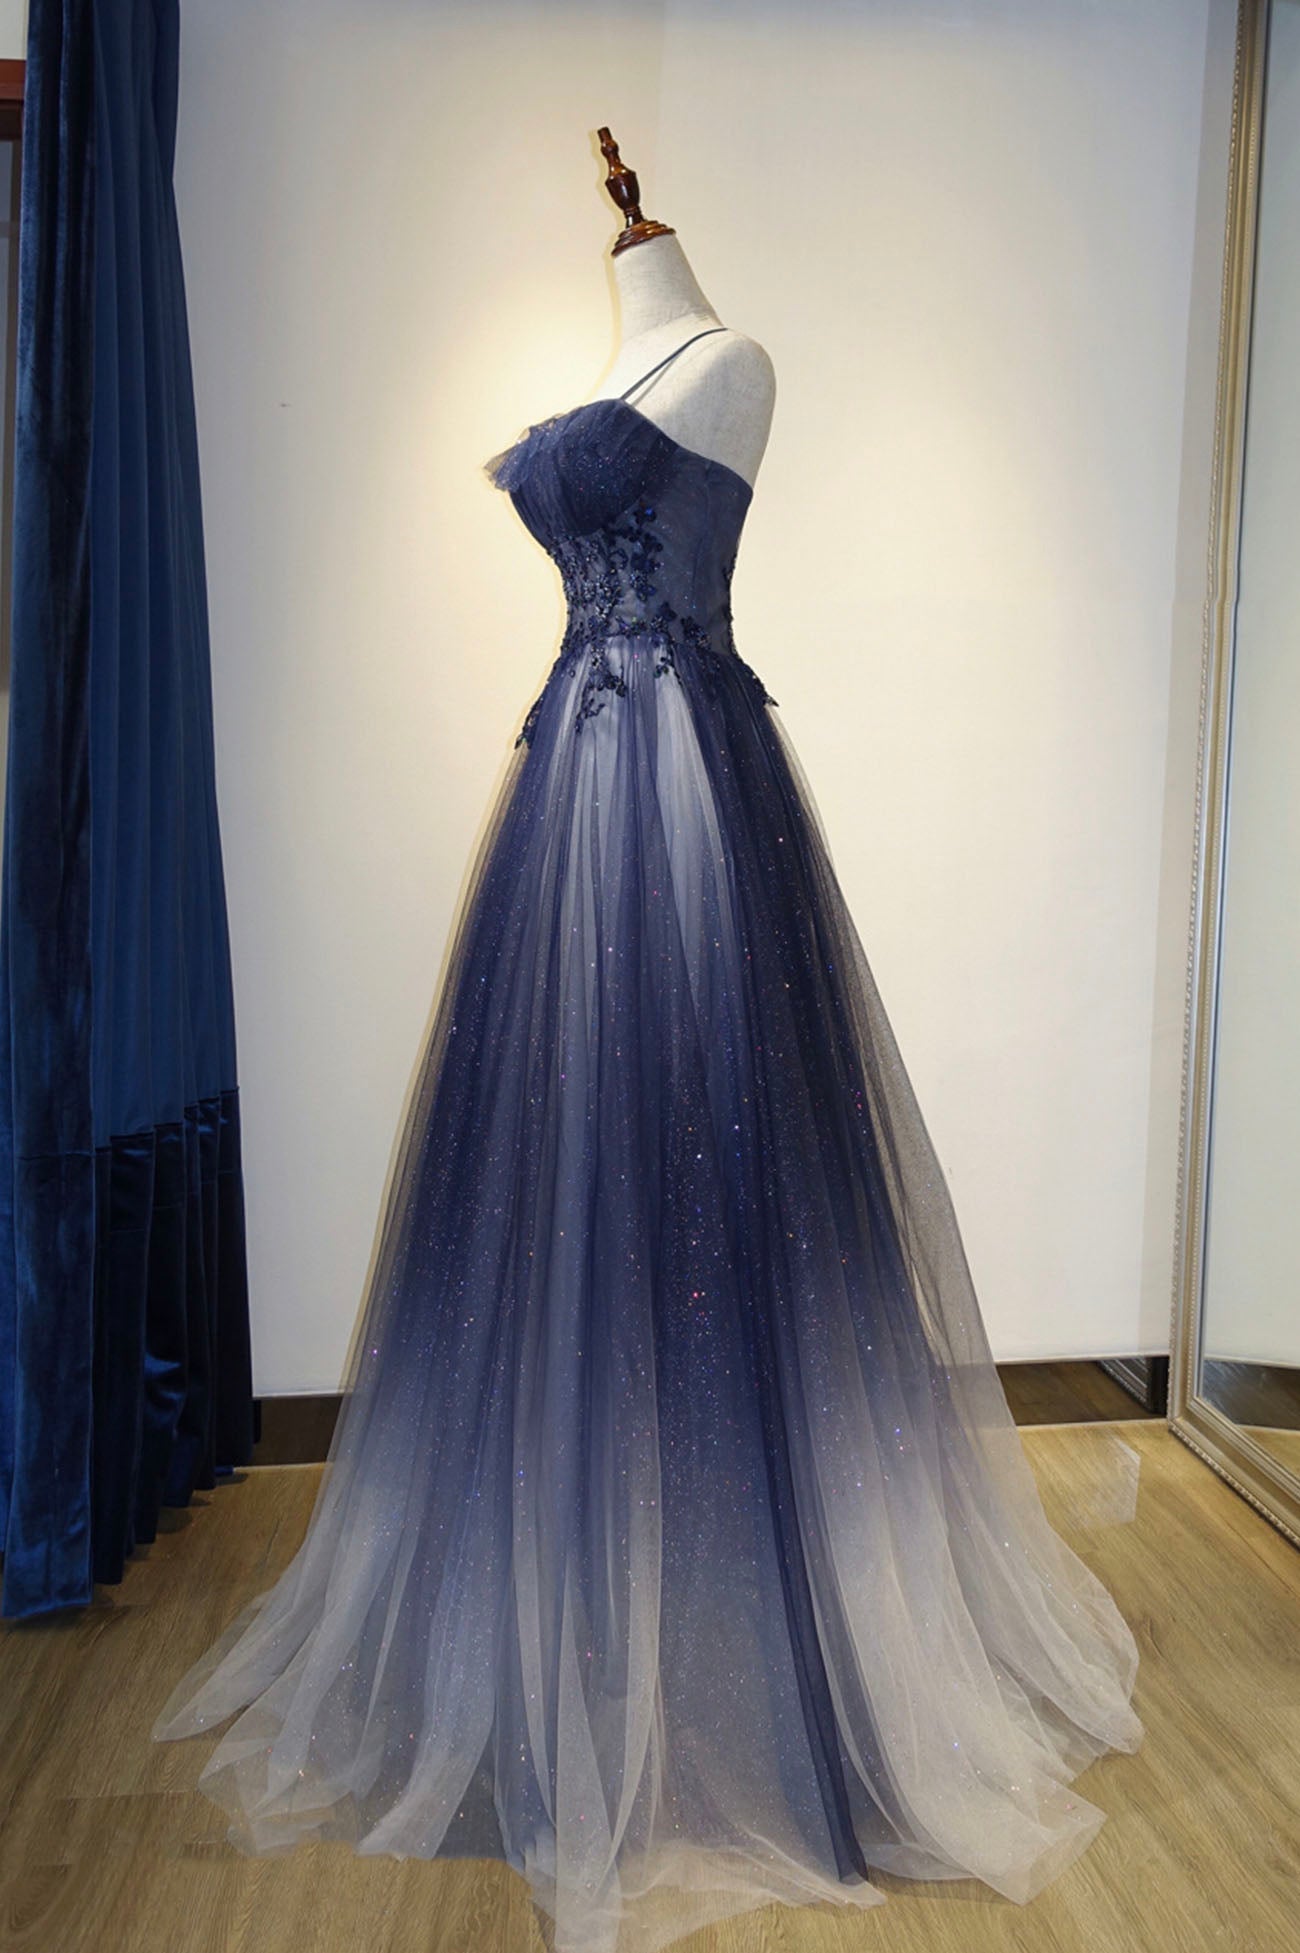 Party Dresses Winter, Spaghetti Strap Gradient Tulle Long Formal Dress, Blue Evening Party Dress